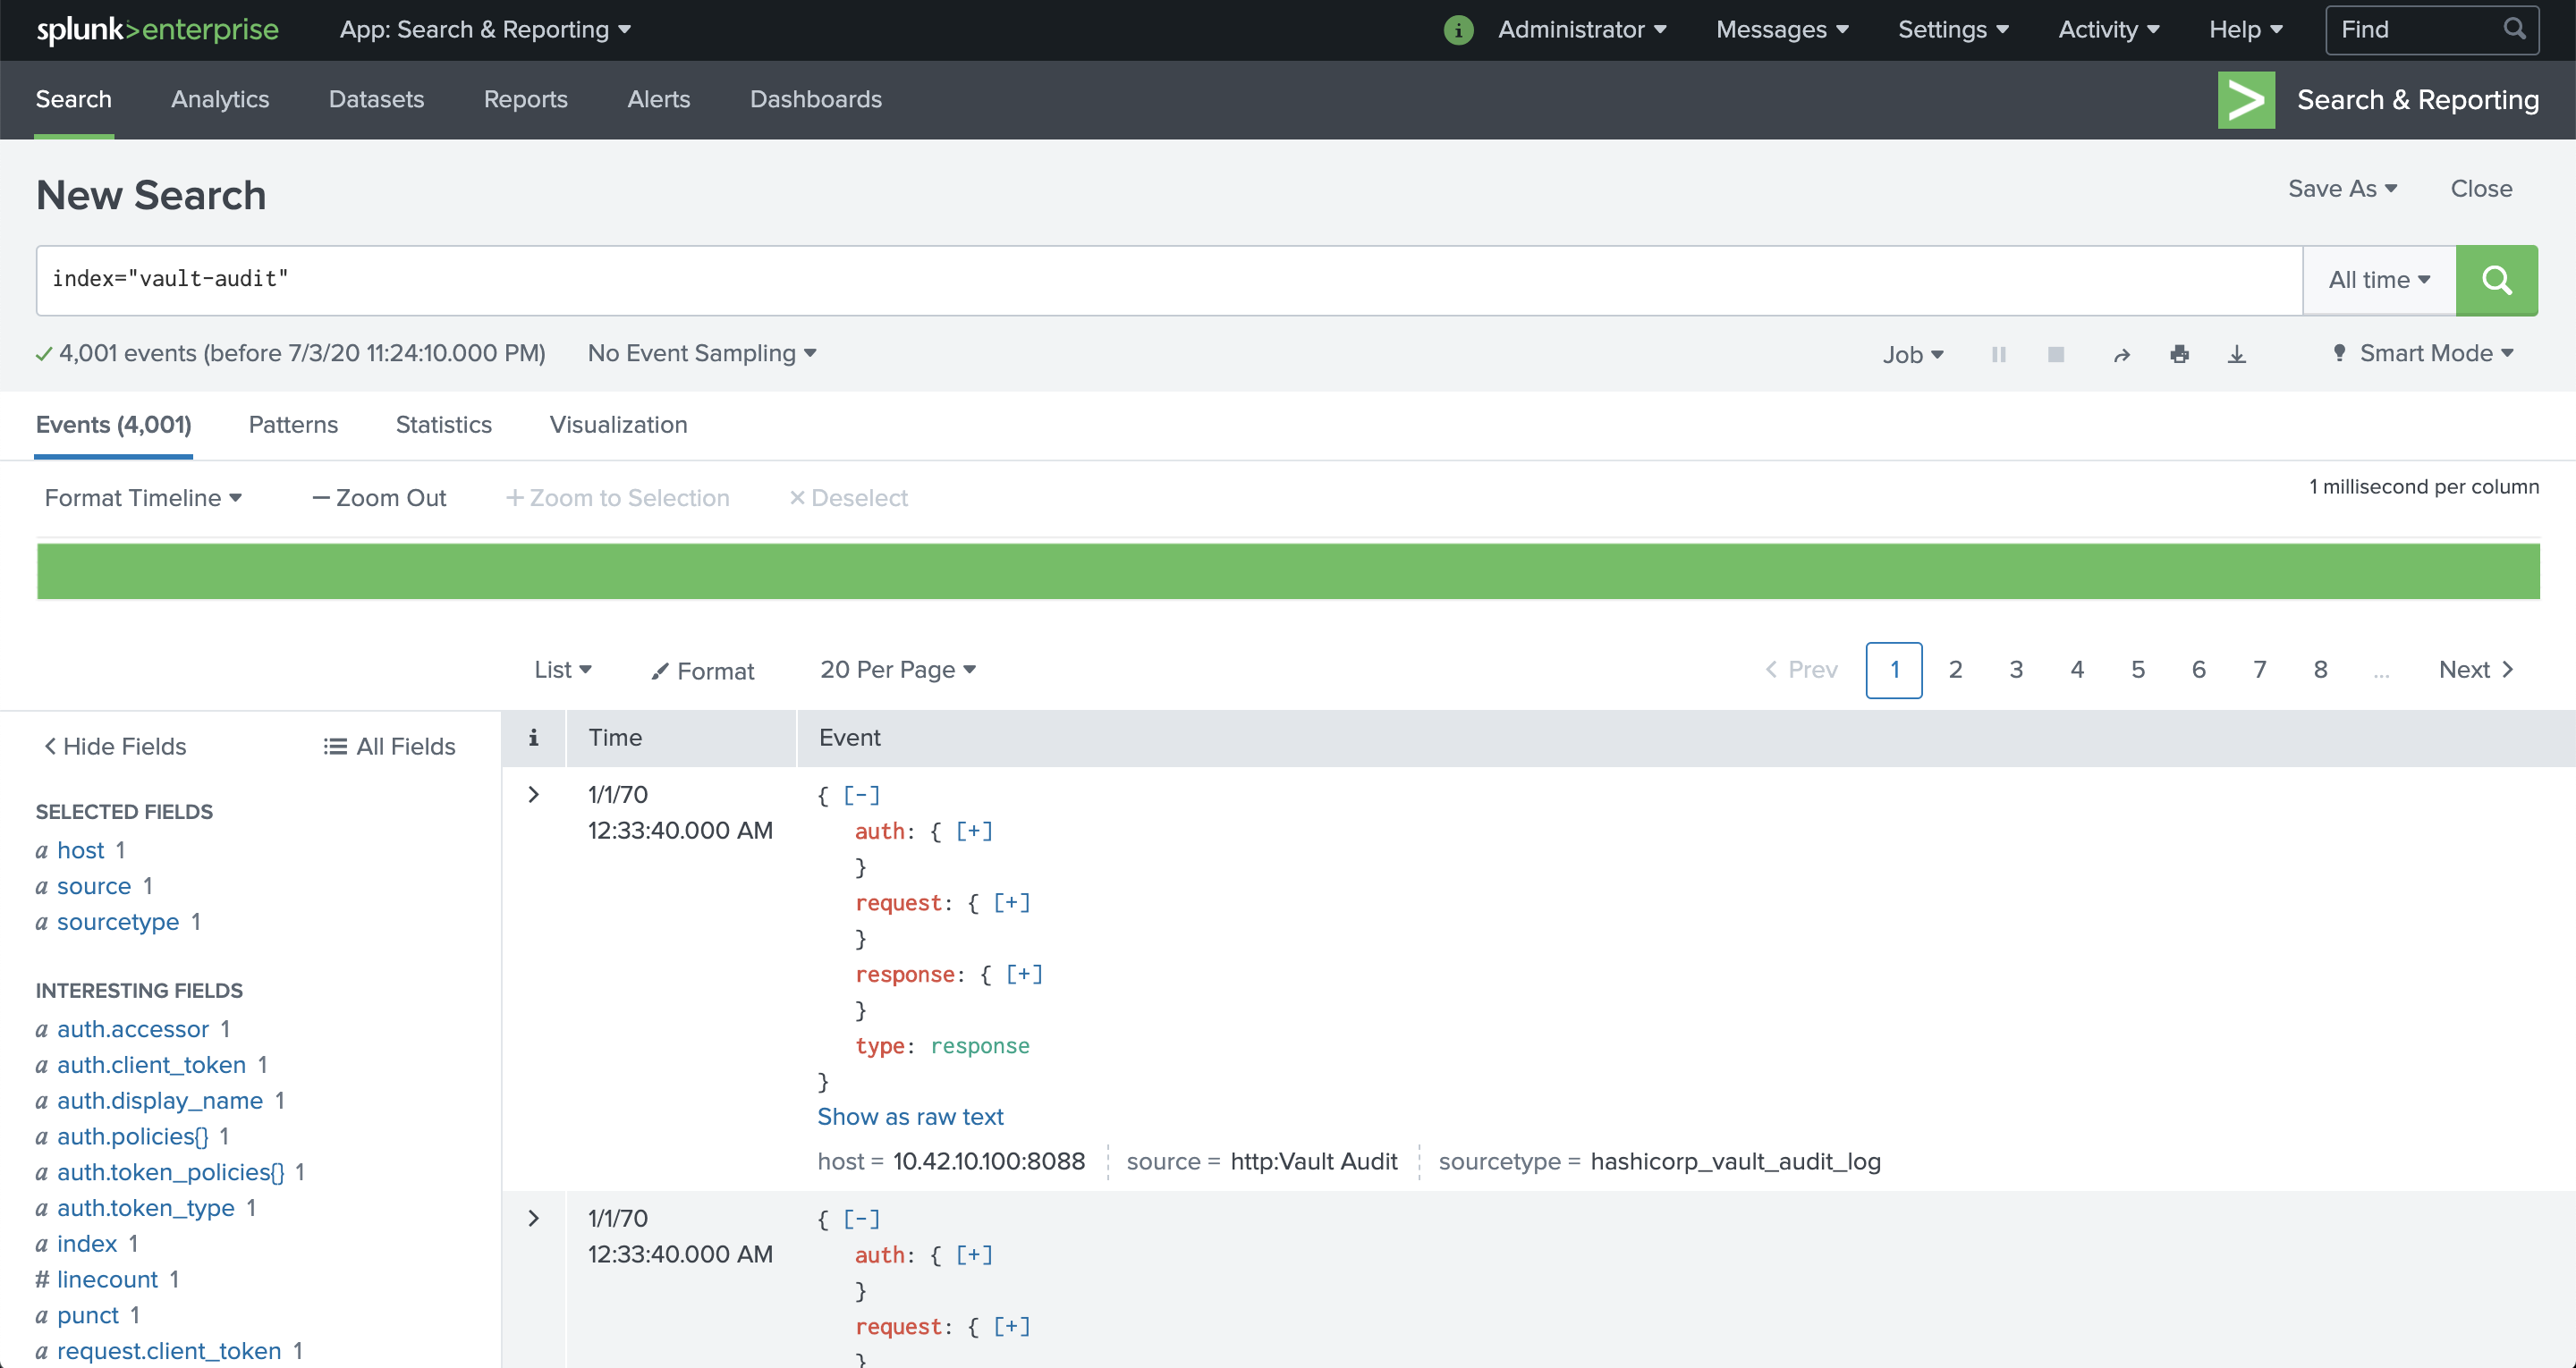 An example of Splunk search functionality